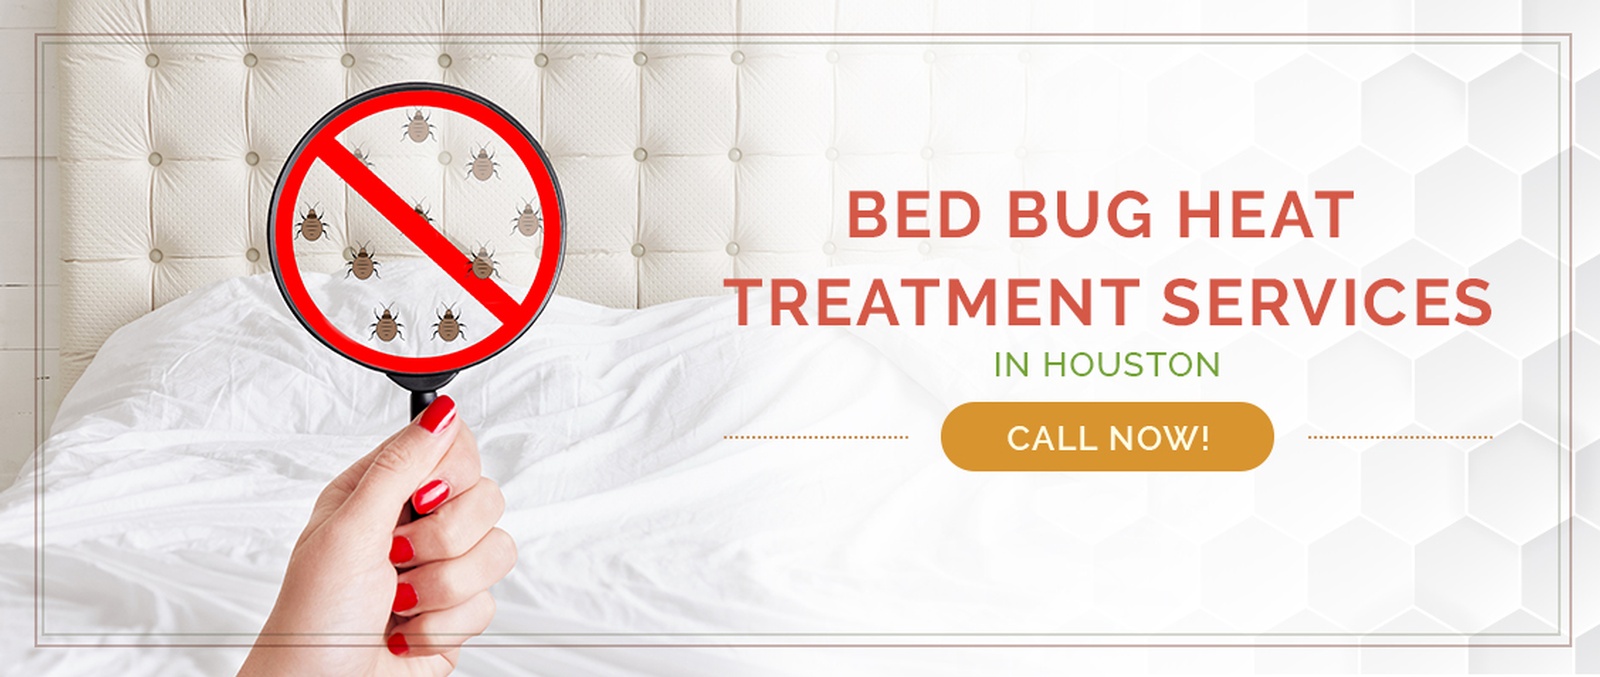 Bed Bug Treatment / Heater Rental Services for Bed Bug Removal - Houston Bed Bug Heaters